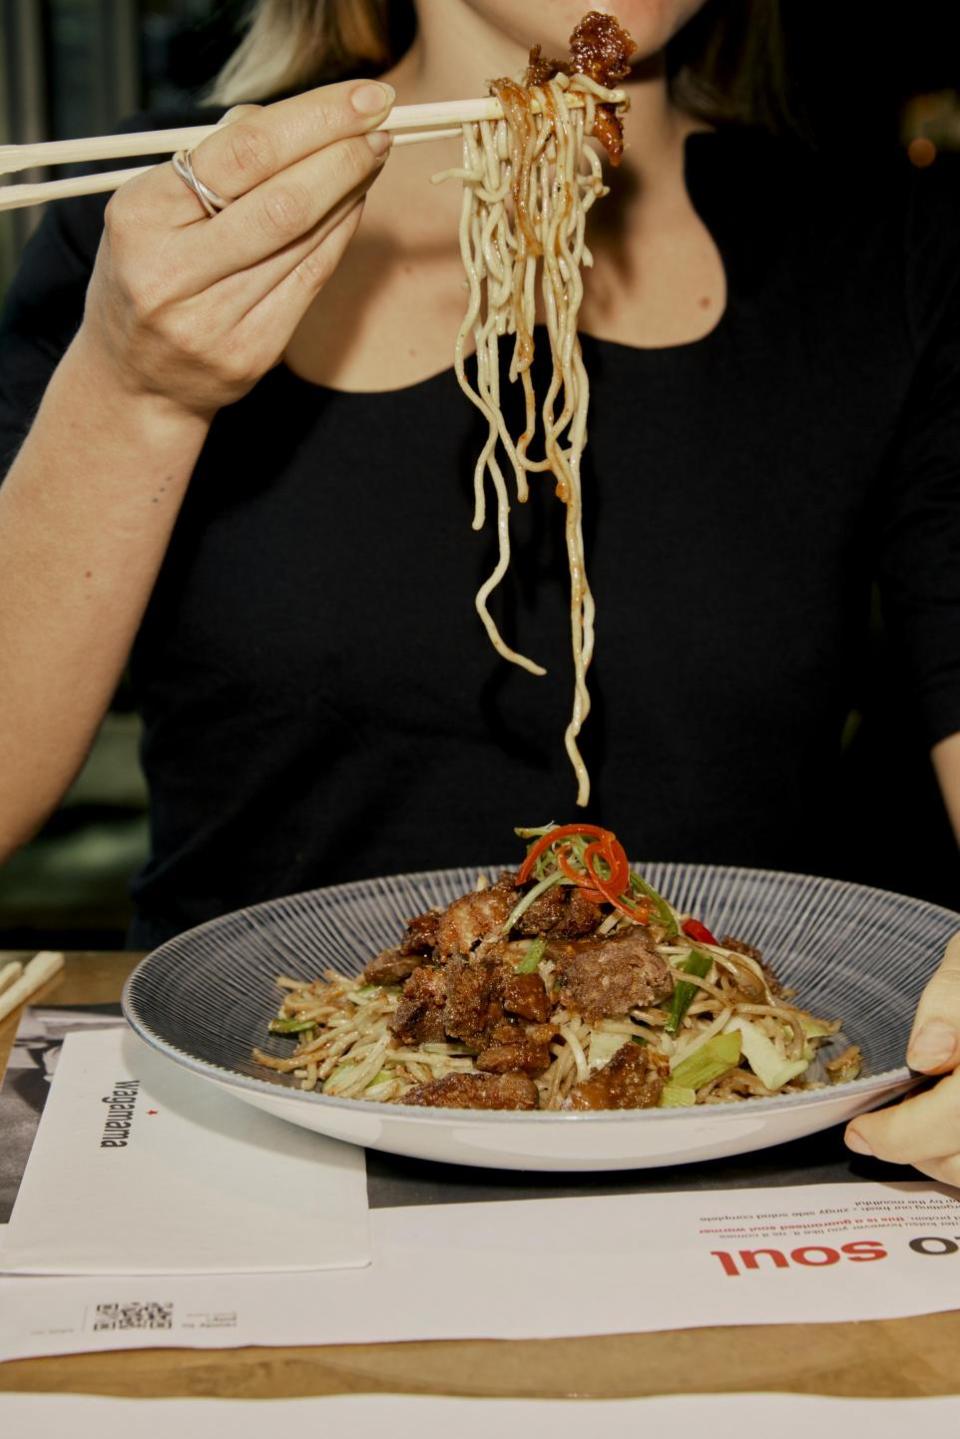 Daily Echo: Wagamama has unveiled a new menu for customers to enjoy as the warm summer months draw near